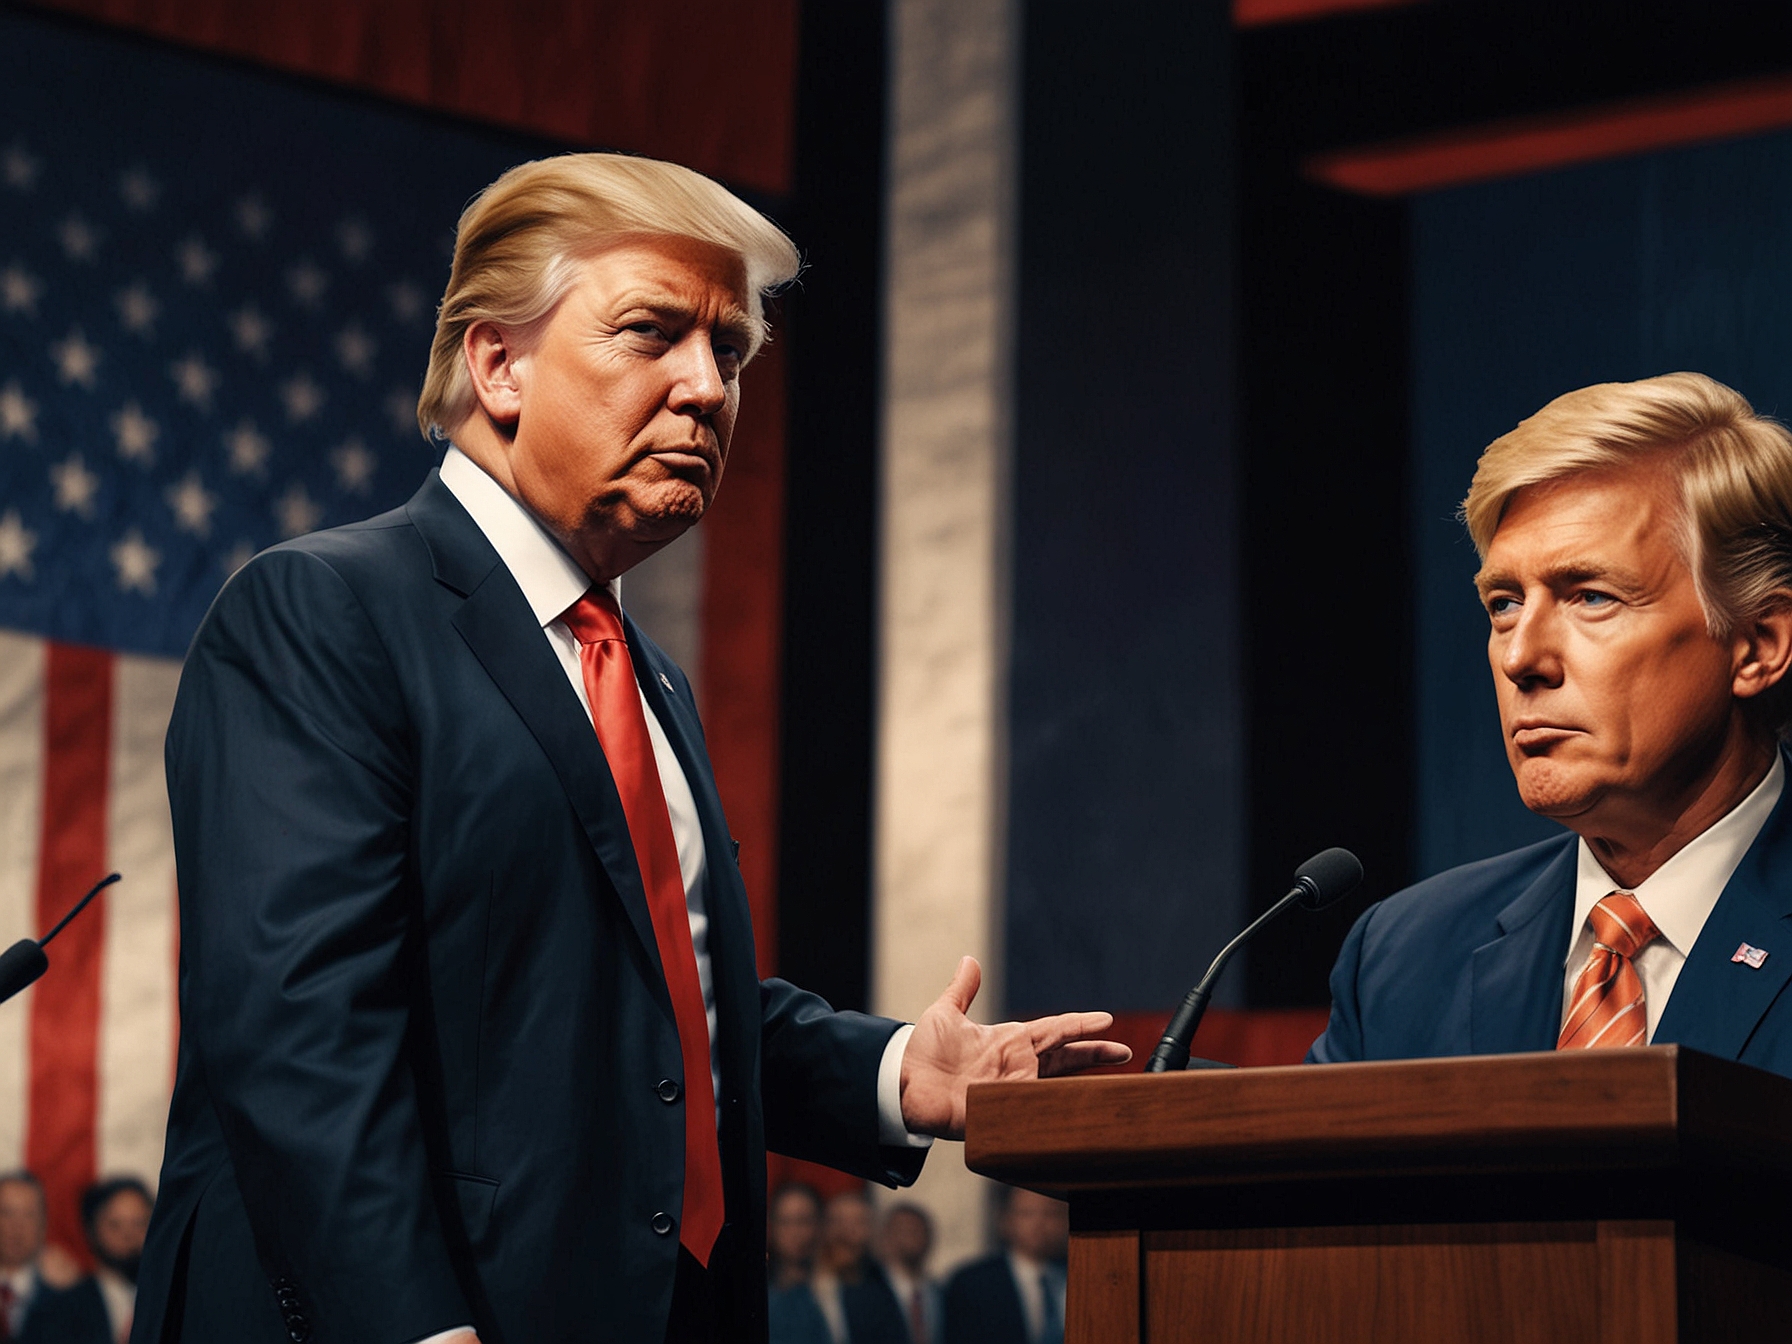 Former President Donald Trump on stage during the first presidential debate, with increasing engagement on Truth Social highlighted in the background.